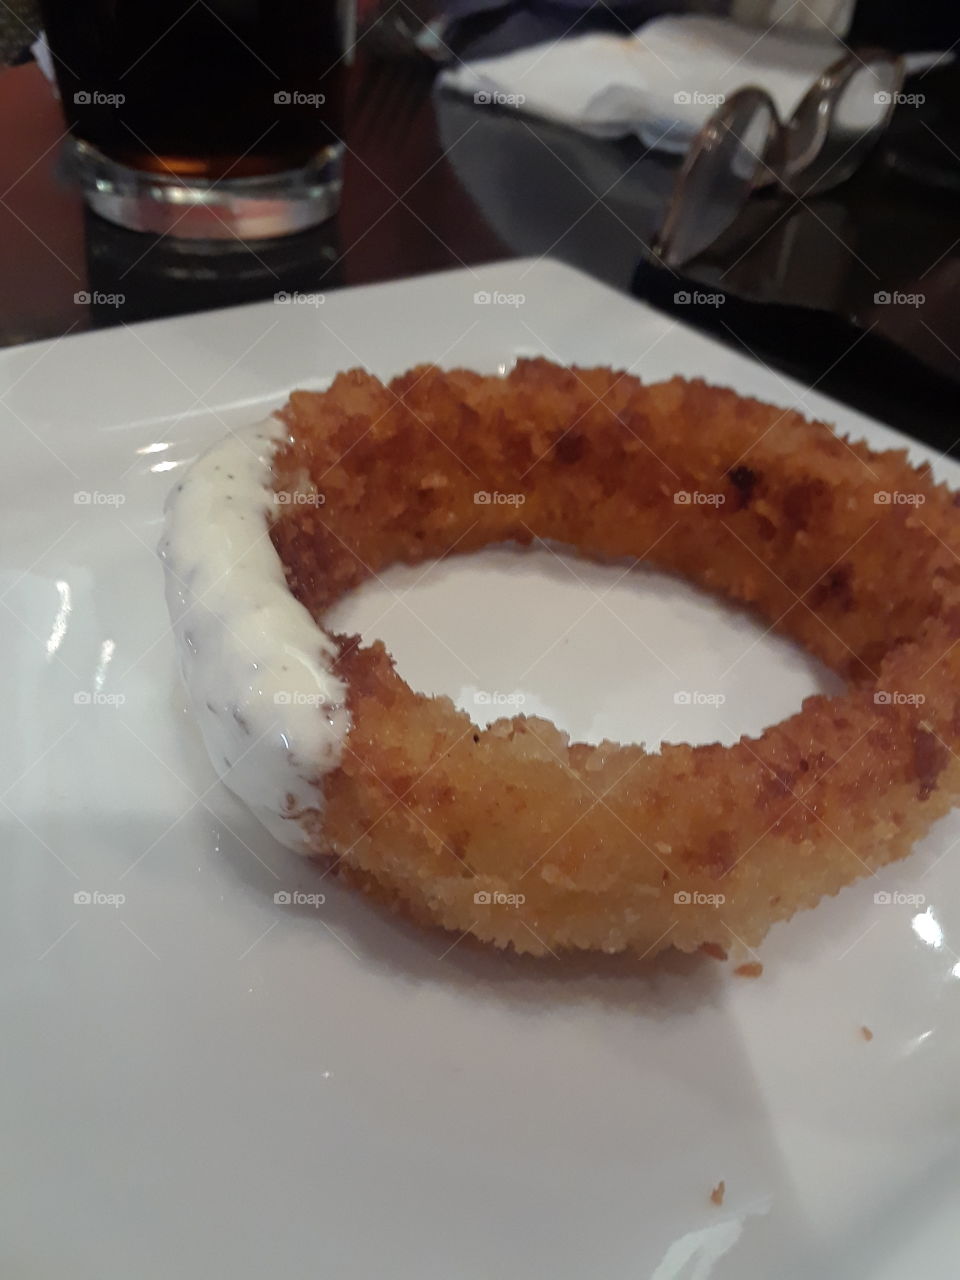 ranched dipped onion ring